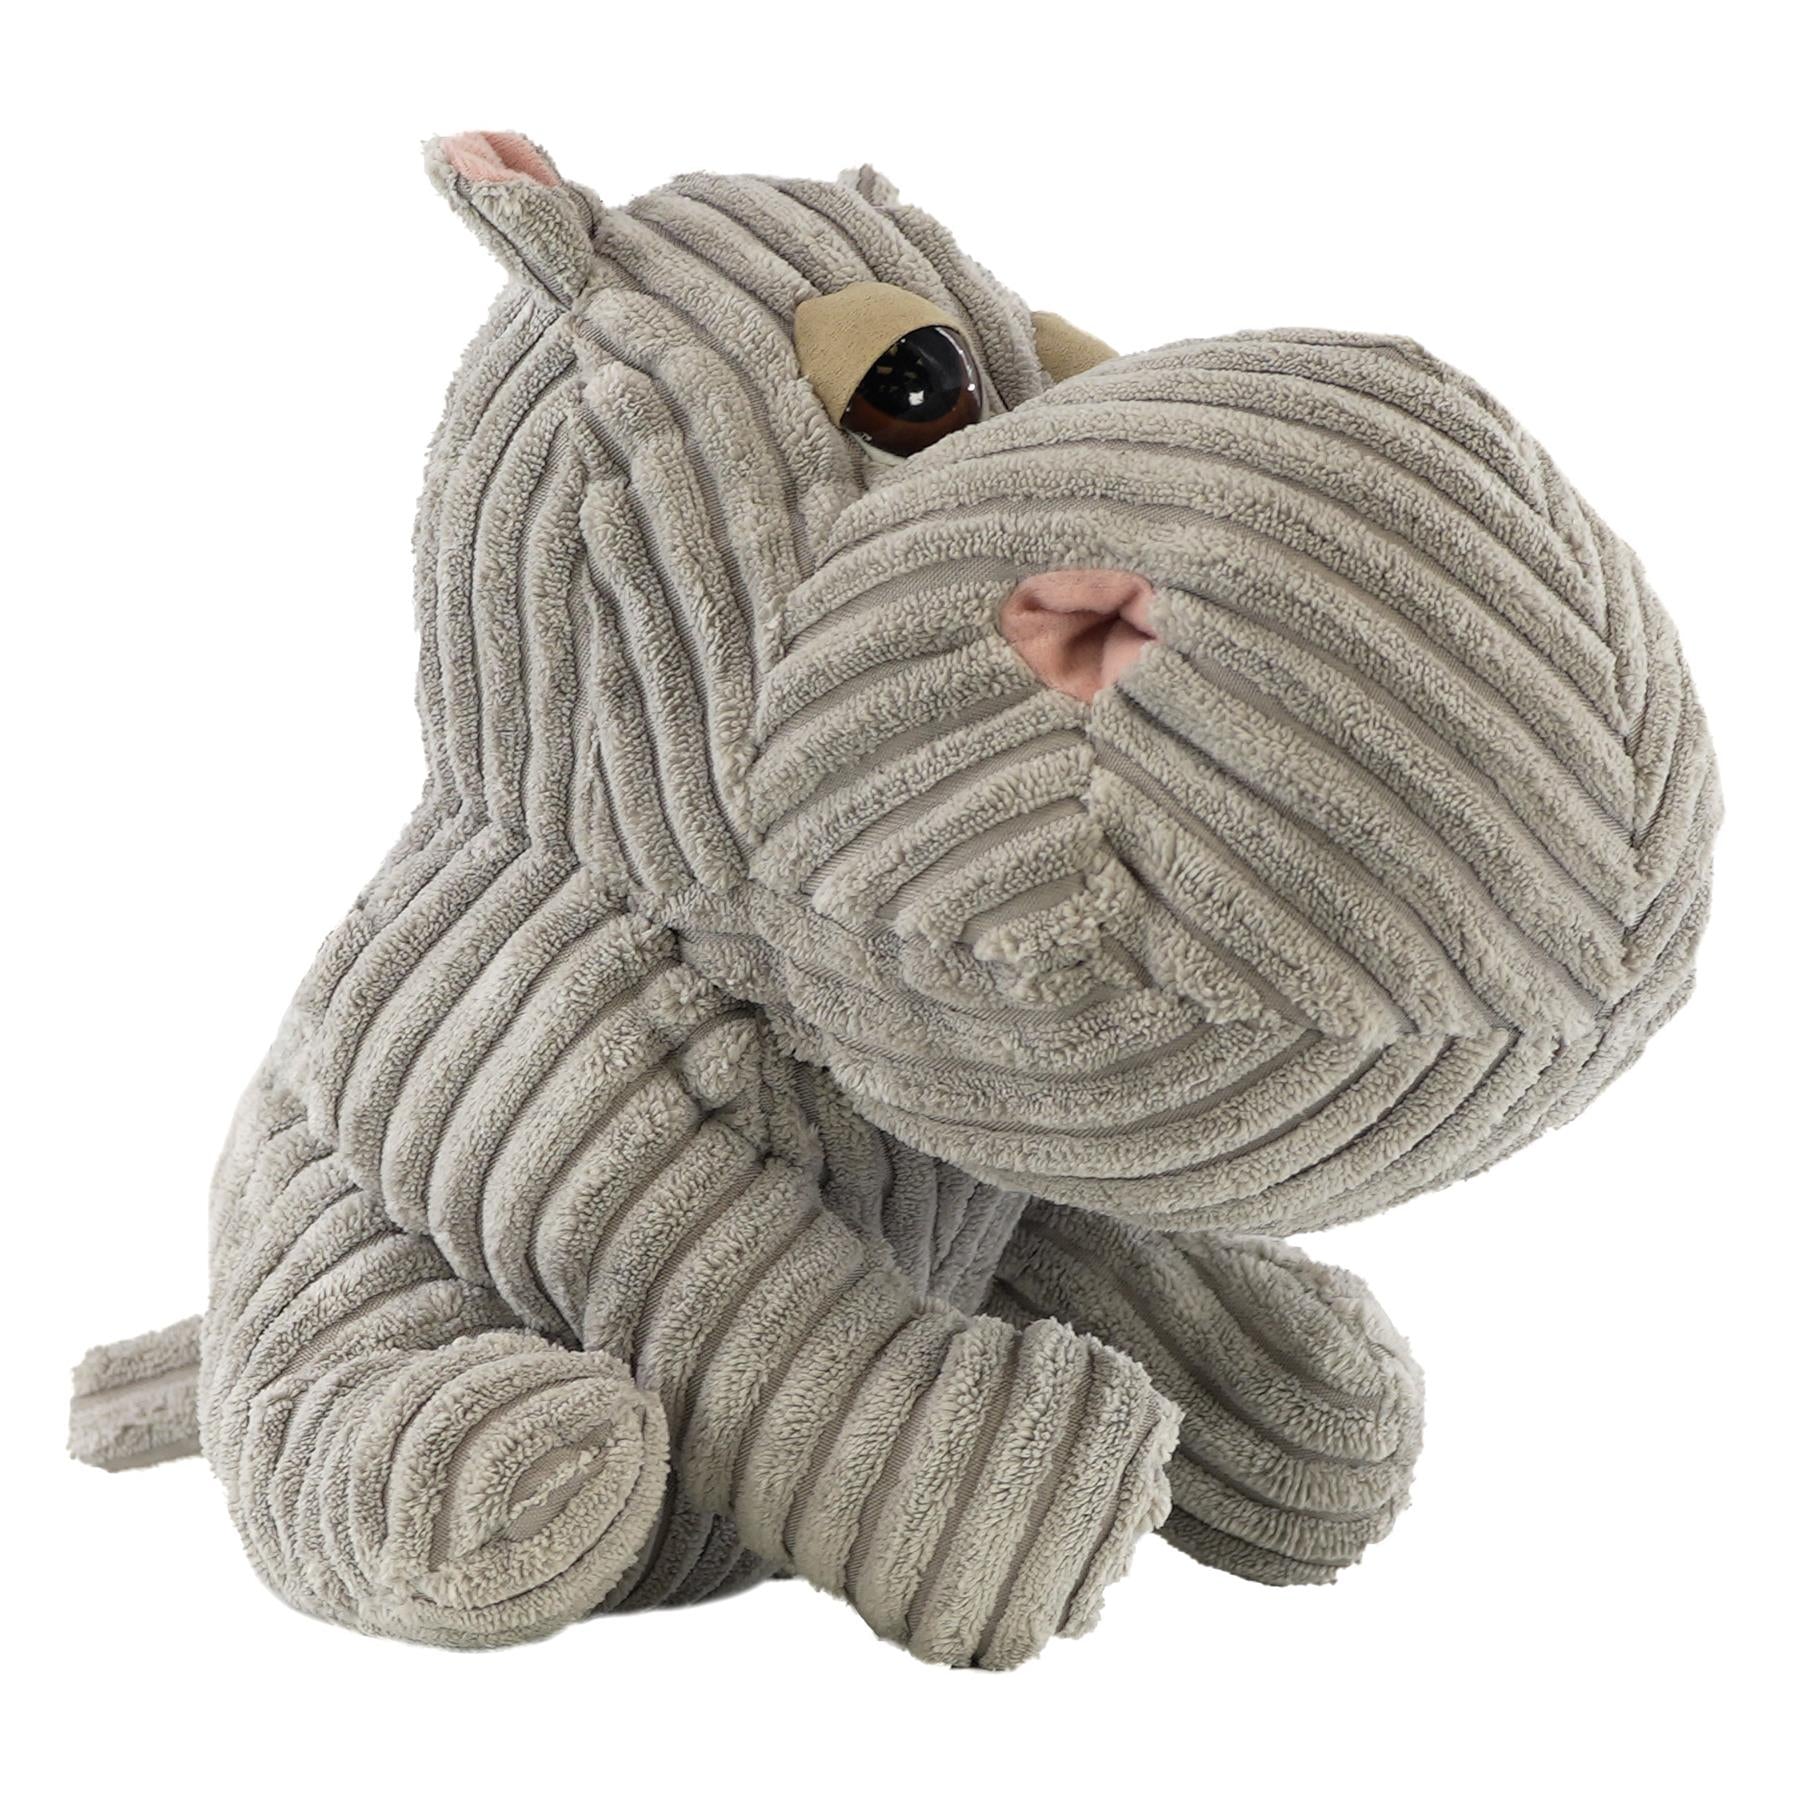 Hippo Novelty Door Stopper by The Magic Toy Shop - UKBuyZone